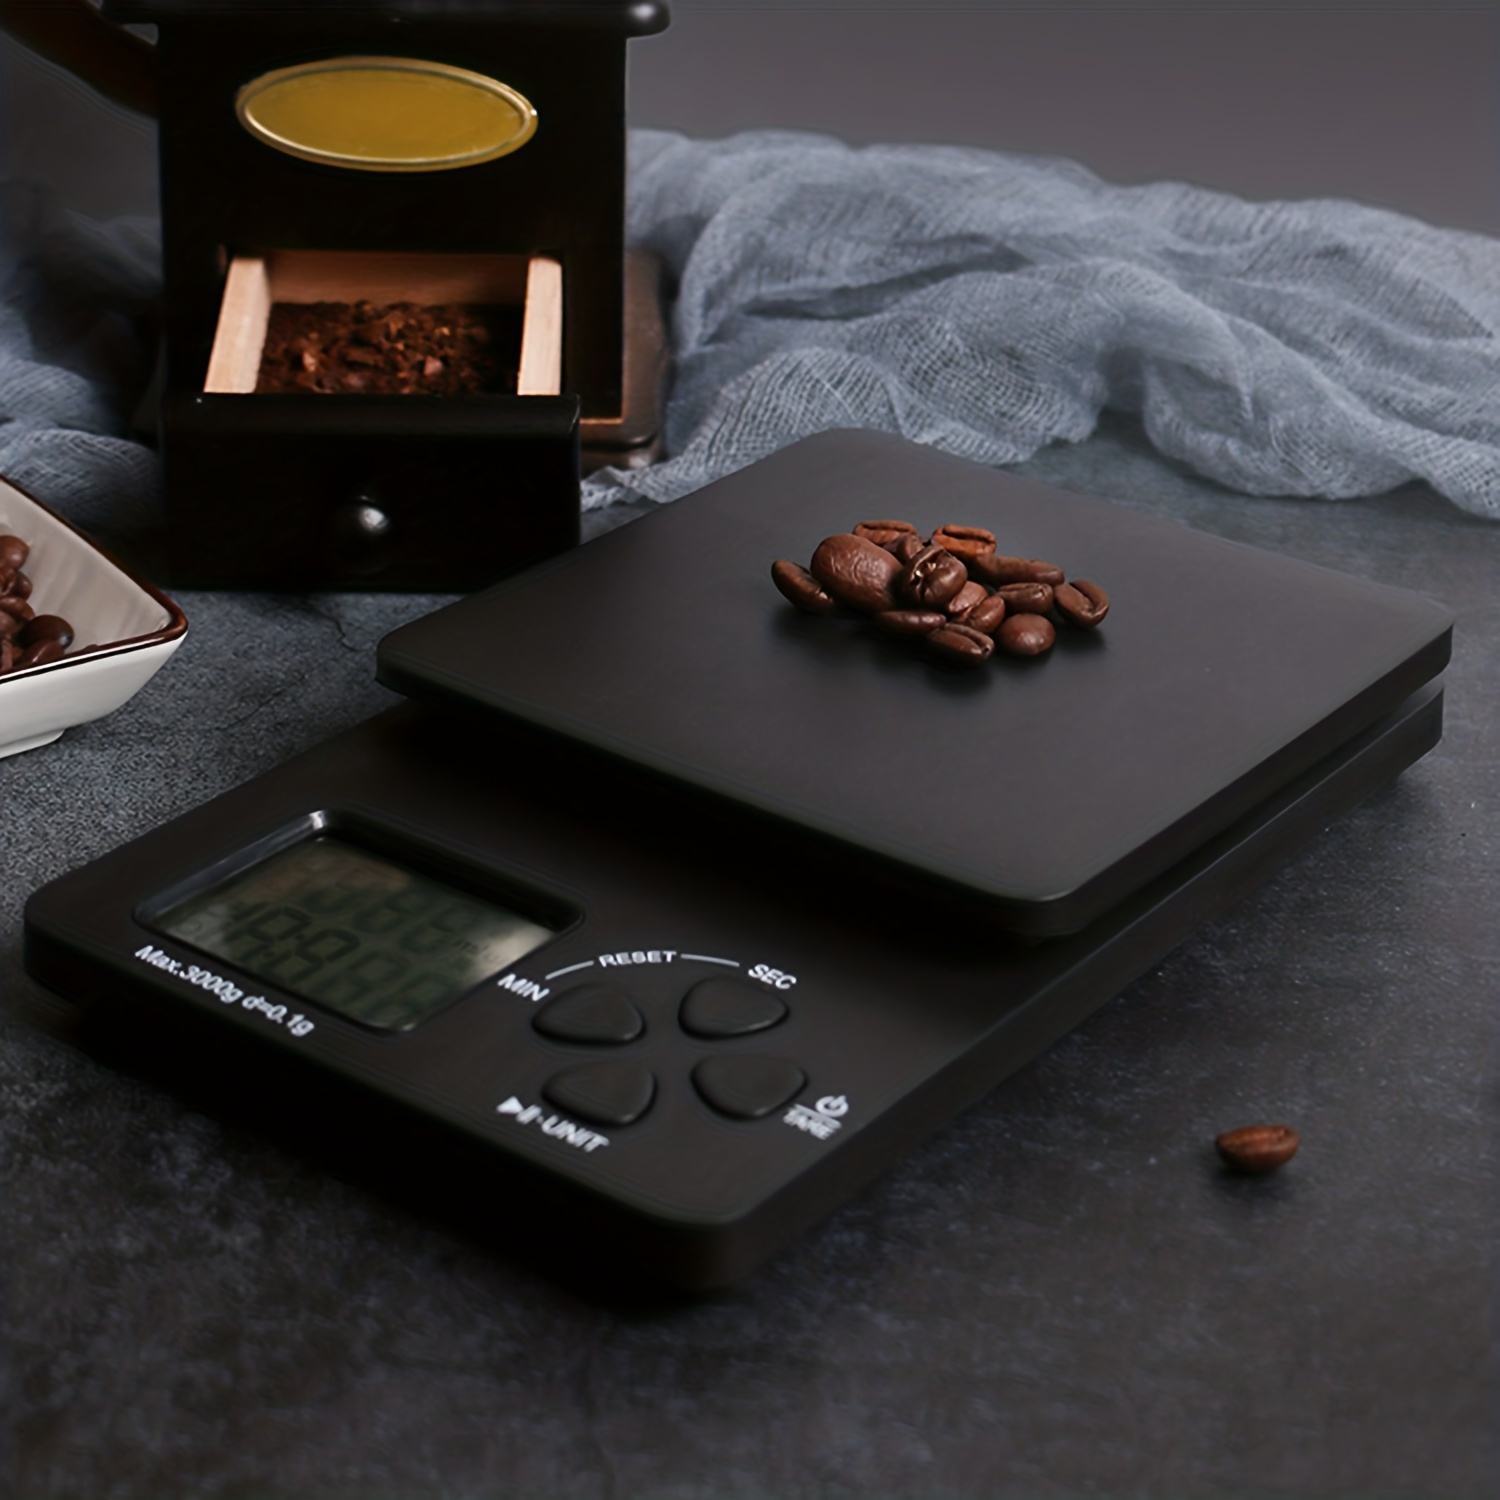 Kitchen Scale, Food Scale, Digital Coffee Scale, Kitchen Weighing